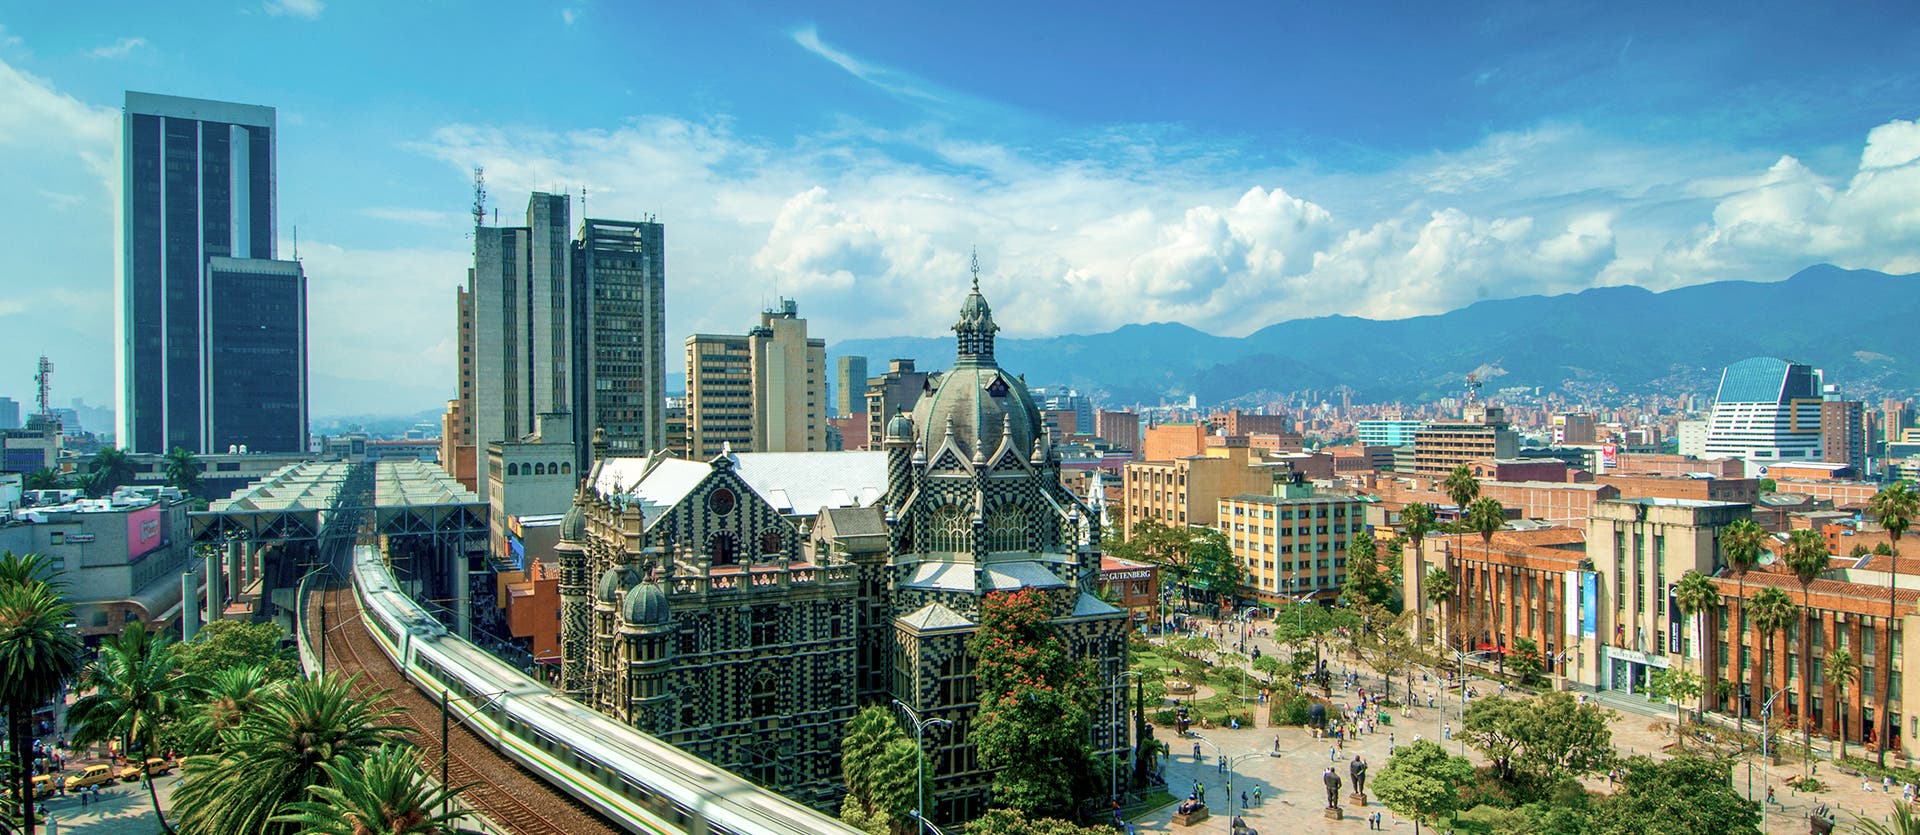 What to see in Colombie Medellín